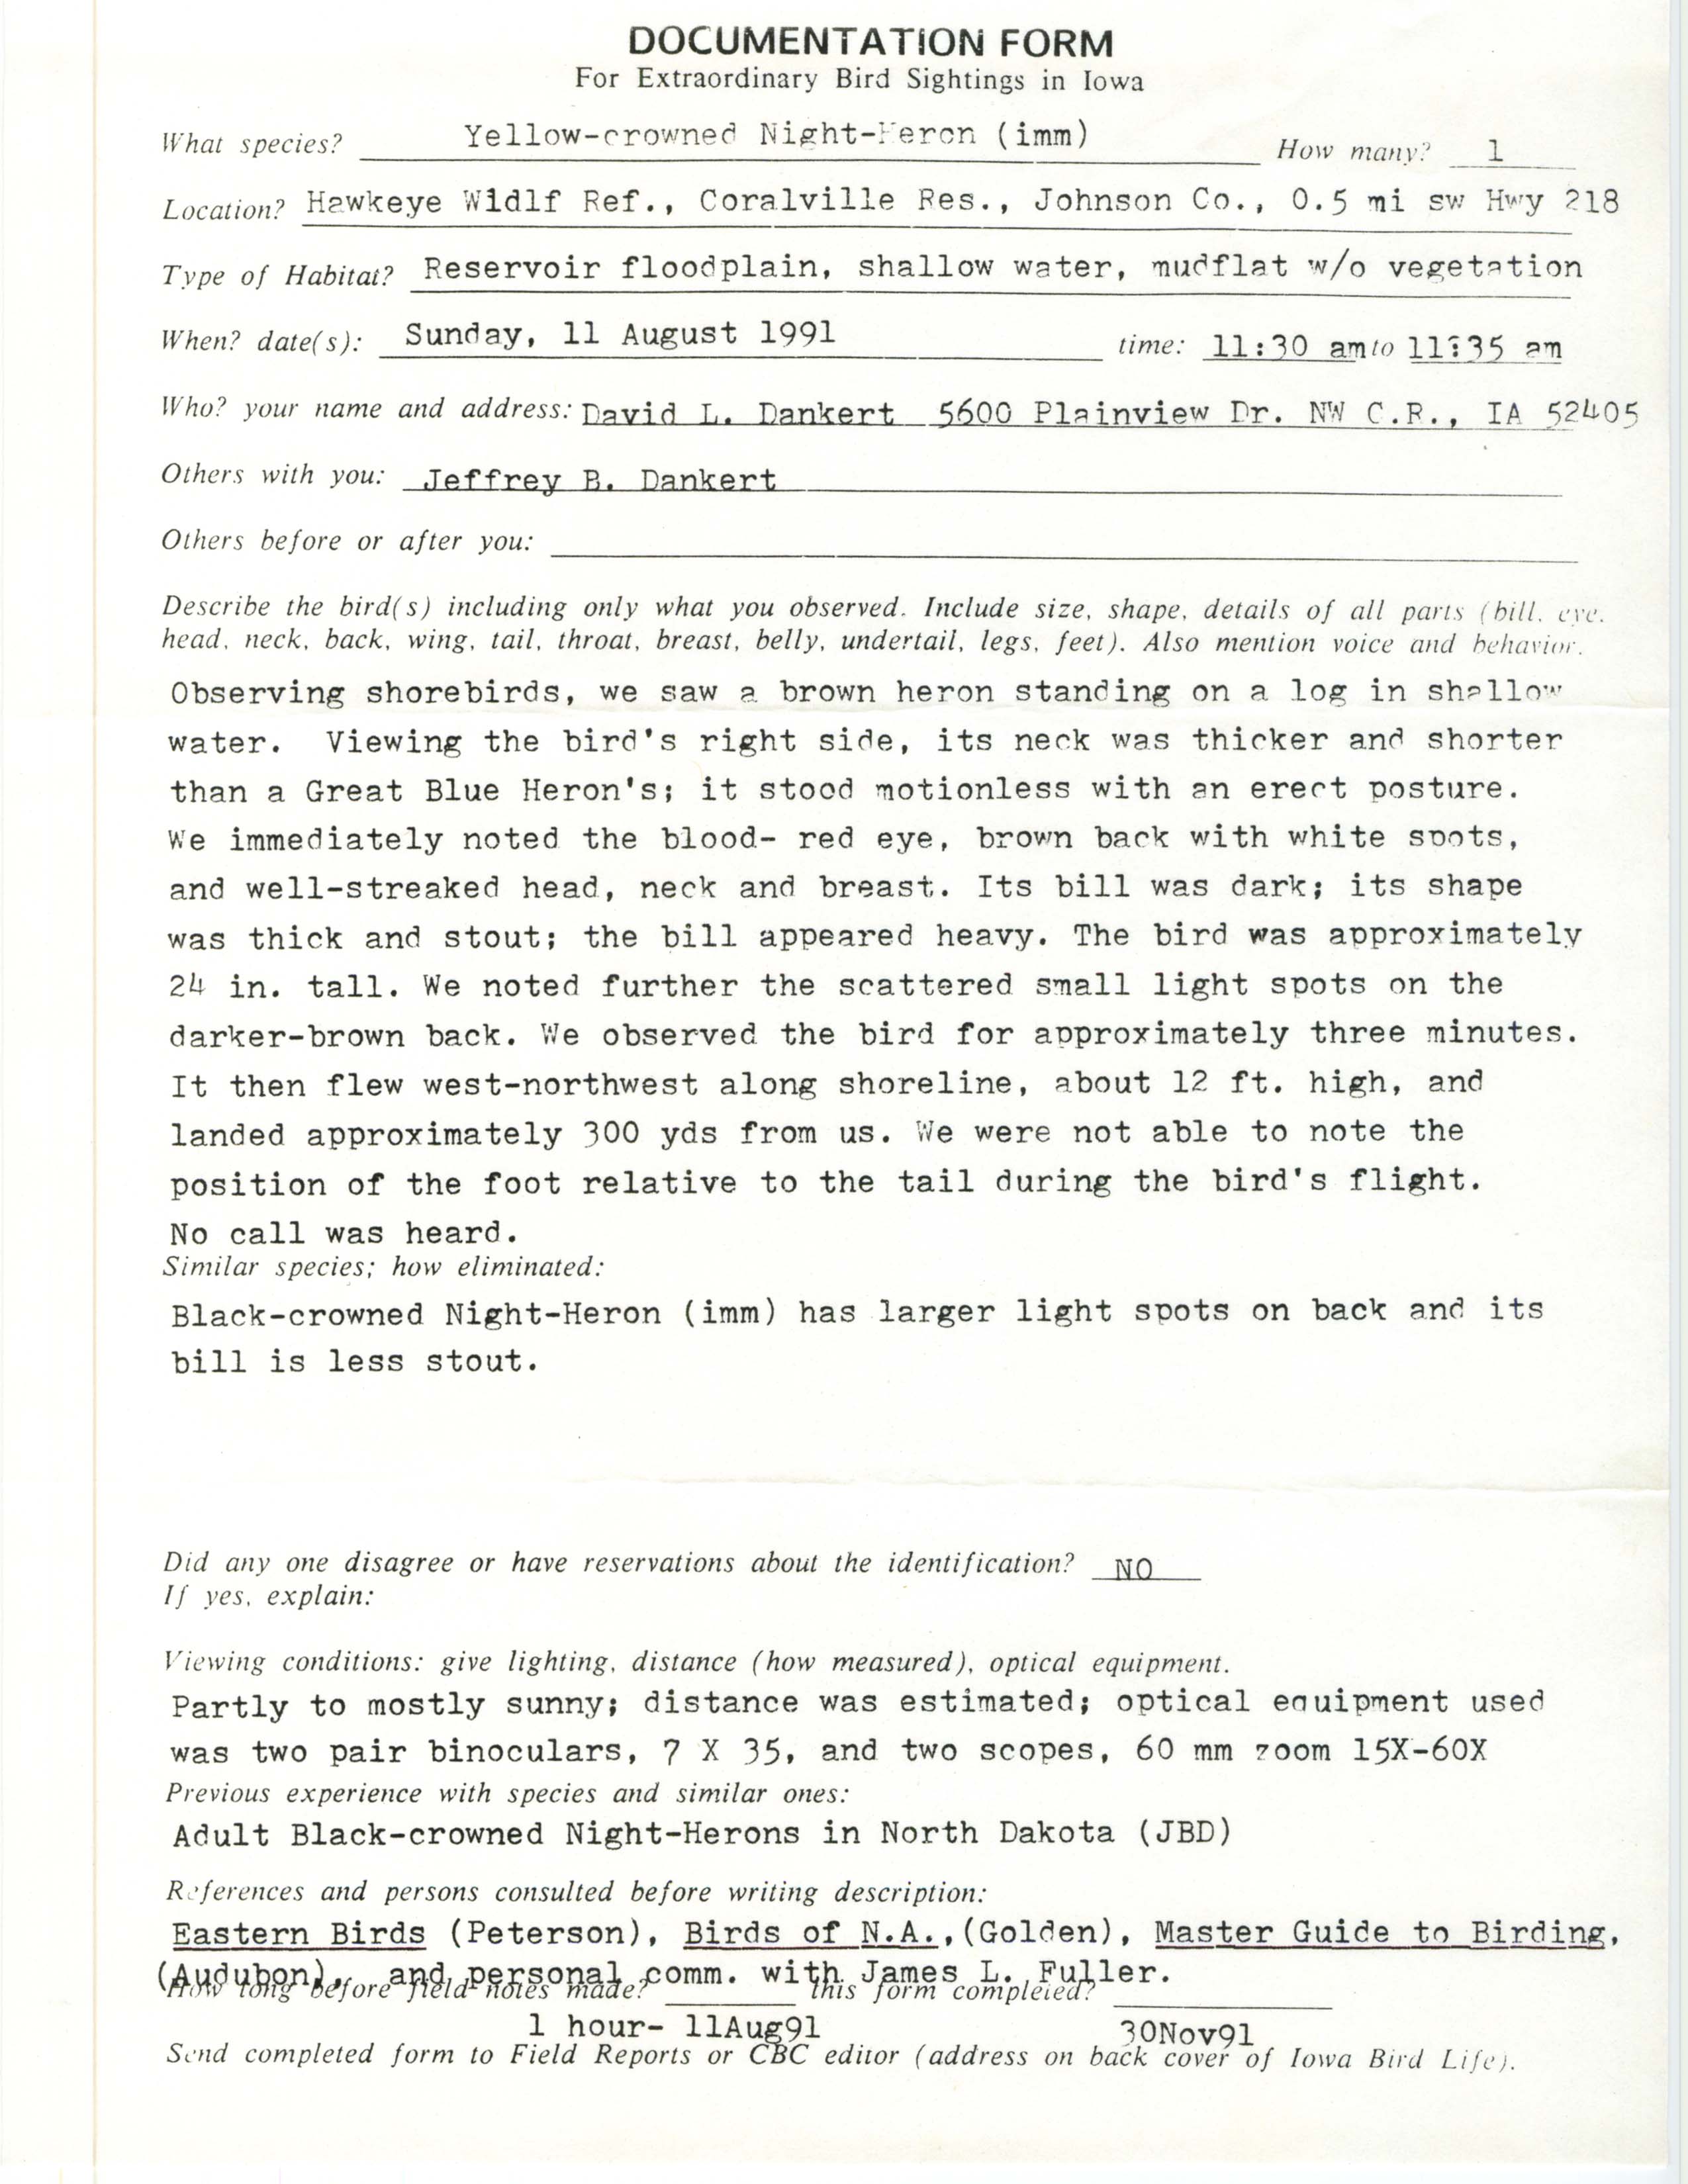 Rare bird documentation form for Yellow-crowned Night Heron at Hawkeye Wildlife Management Area, 1991